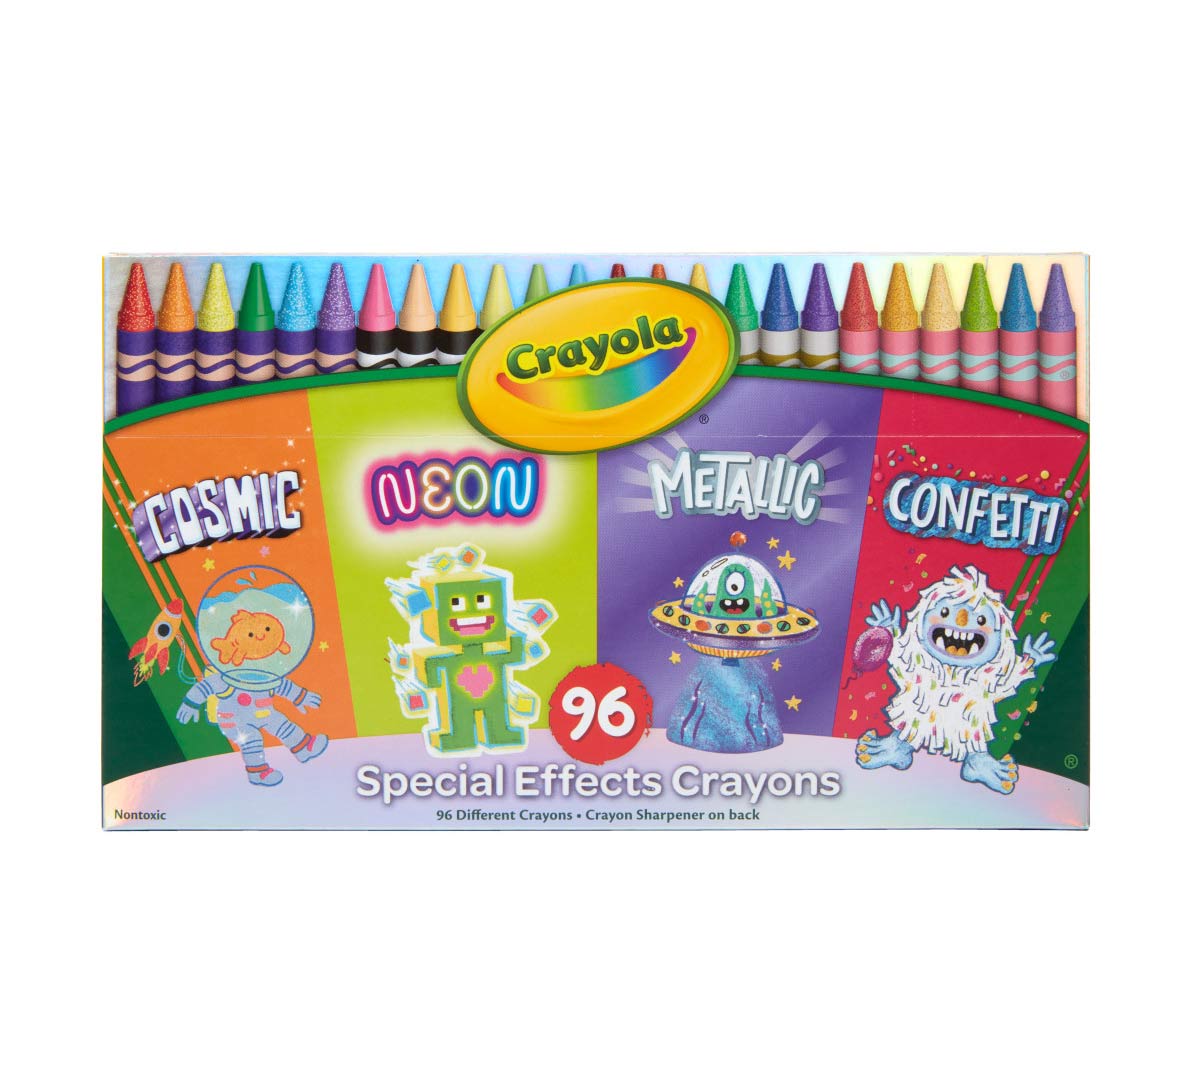 Crayola Fluorescent Crayons: What's Inside the Box